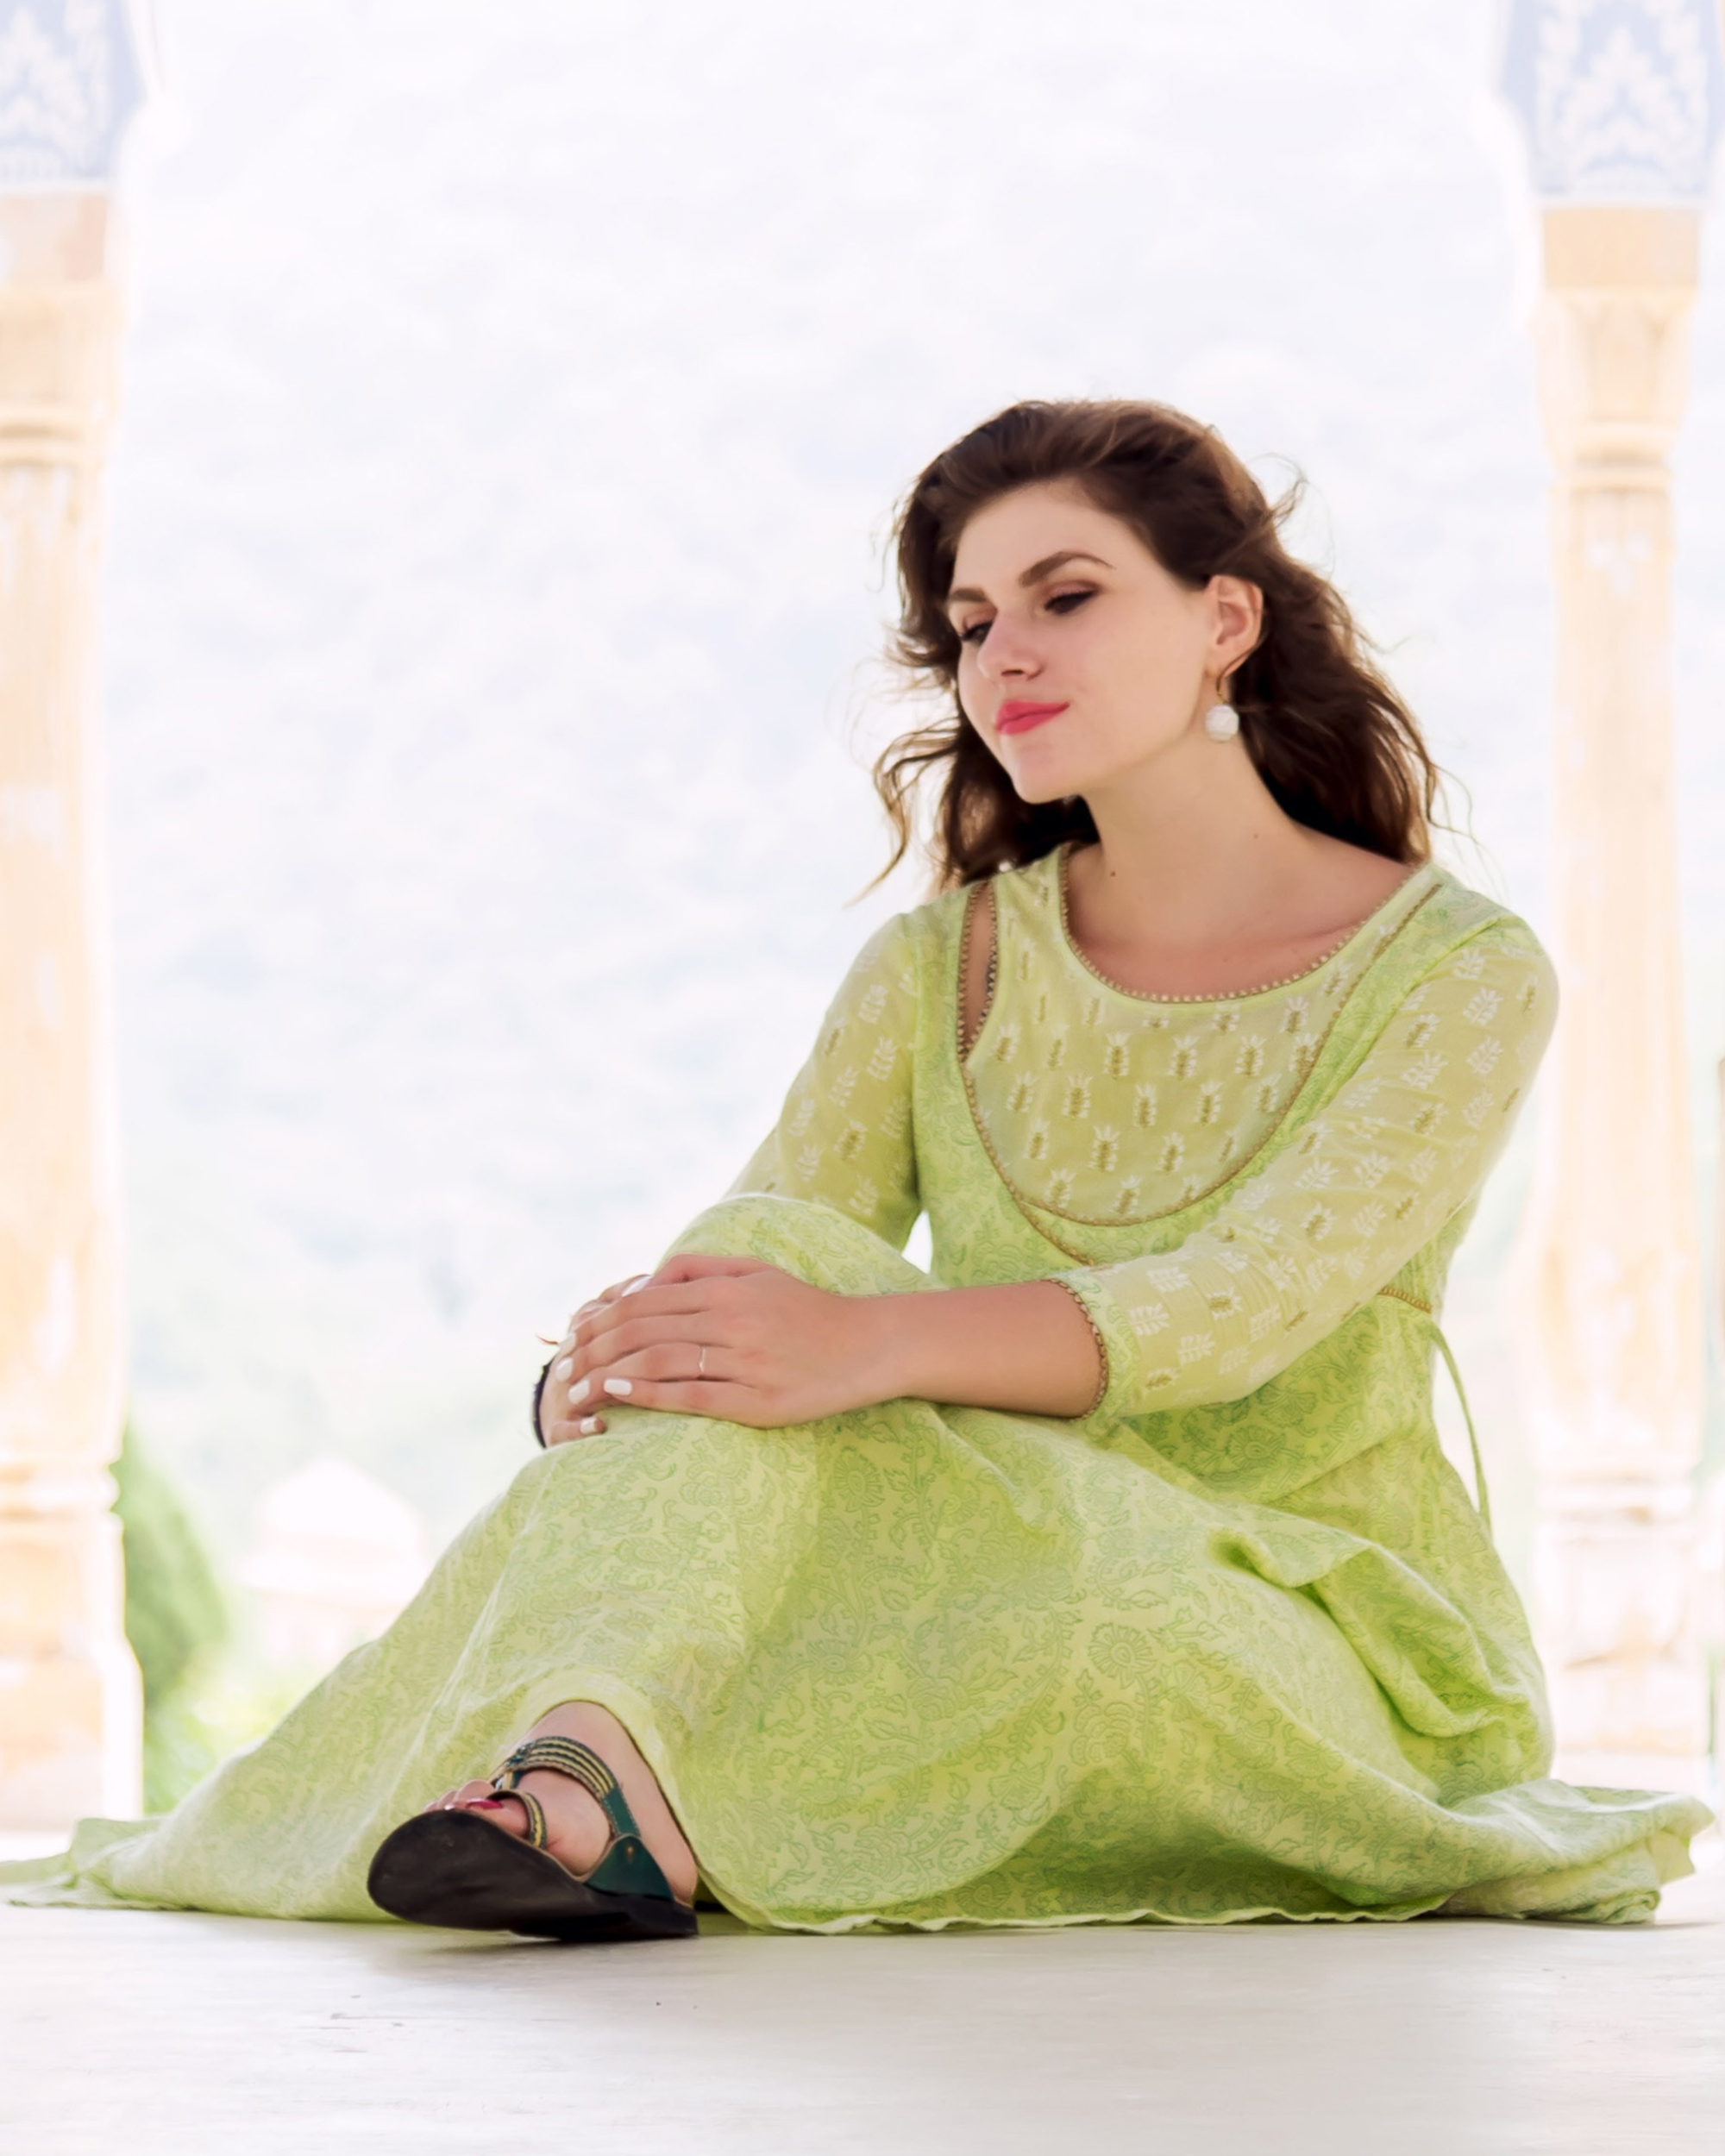 Lime green amazing designer anarkali salwar suit to make you different from  crowd from www.indiabazaaronline.com | Clothes design, Indian fashion,  Saree designs